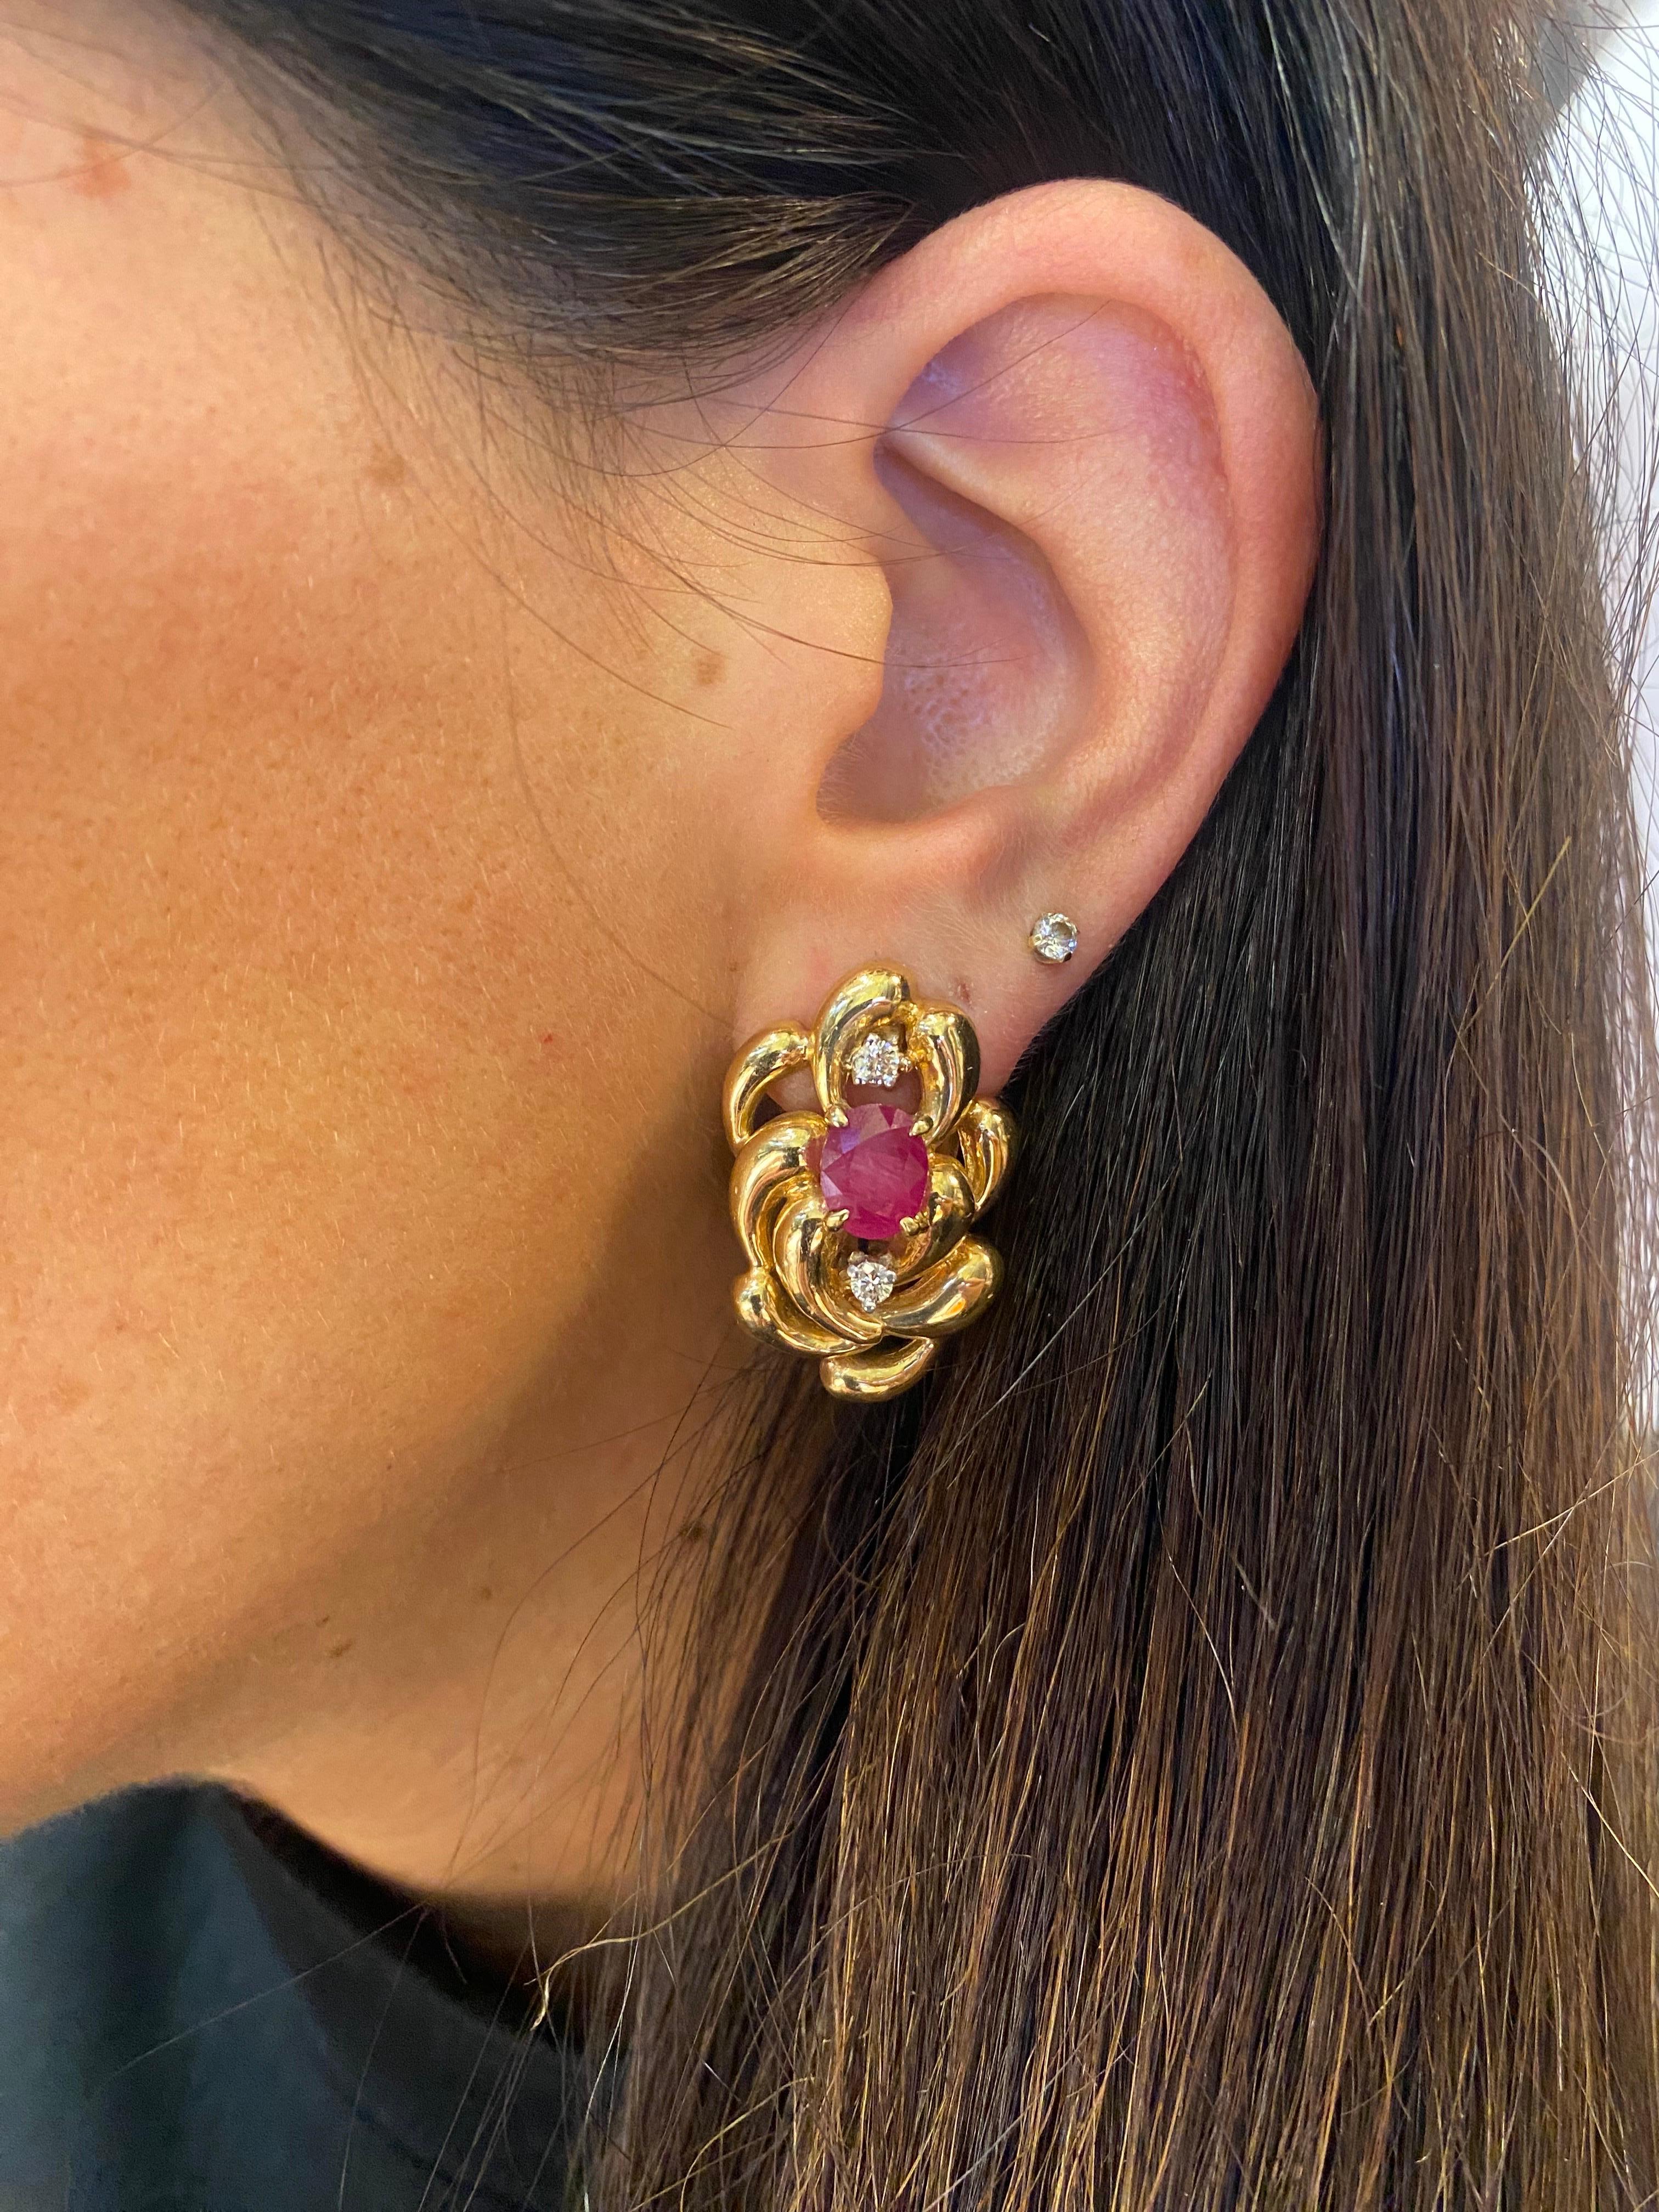 Ruby and Diamond Earrings

A pair of earrings set with oval-cut rubies and two round-cut diamonds.

Approximate Combined Weights
Rubies: 2 Carat
Diamonds: 0.6 Carats

Measures approximately 1